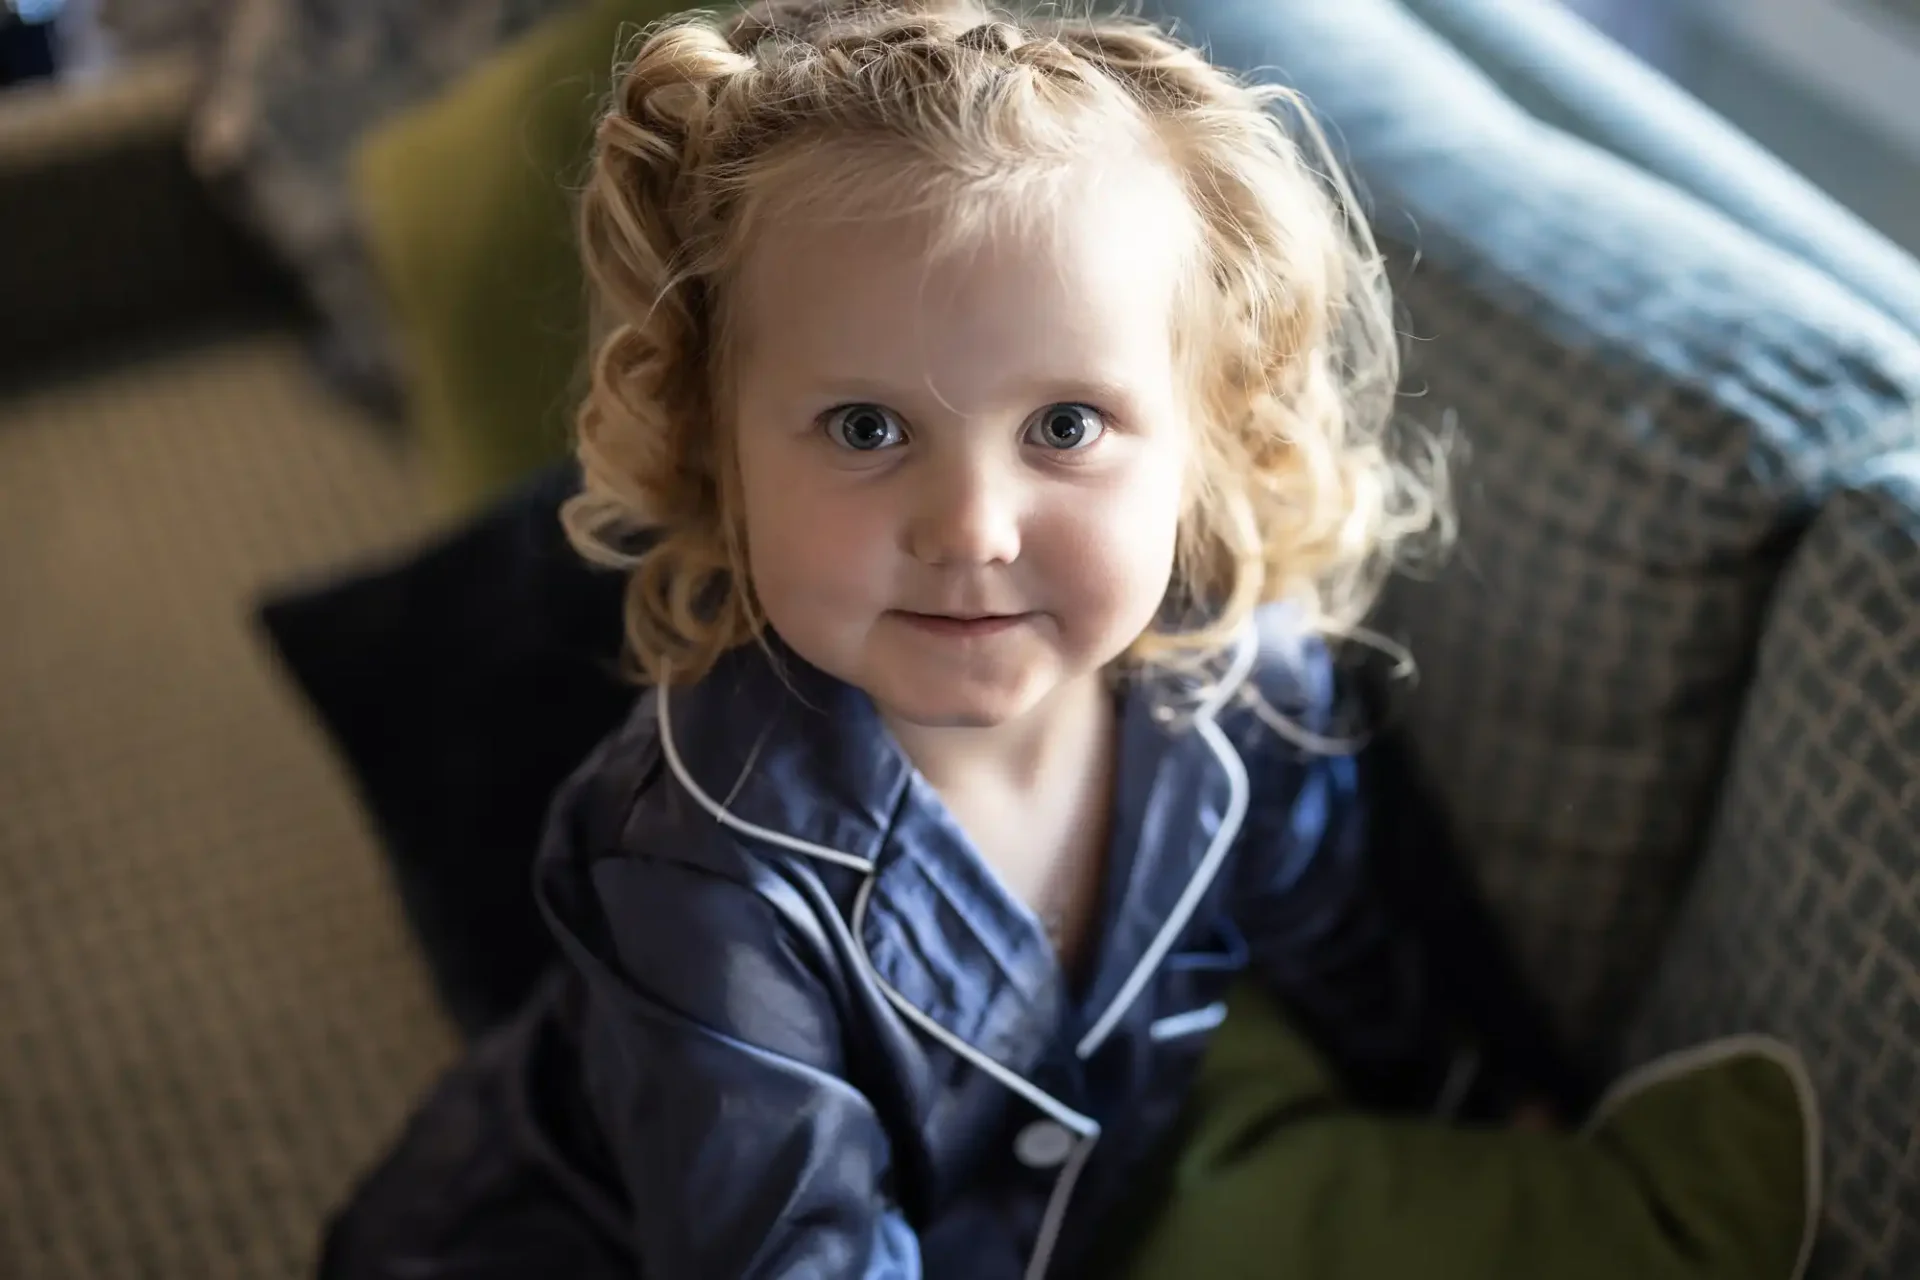 A toddler with curly blonde hair smiling while wearing a blue jacket, seated indoors on a cushioned surface.